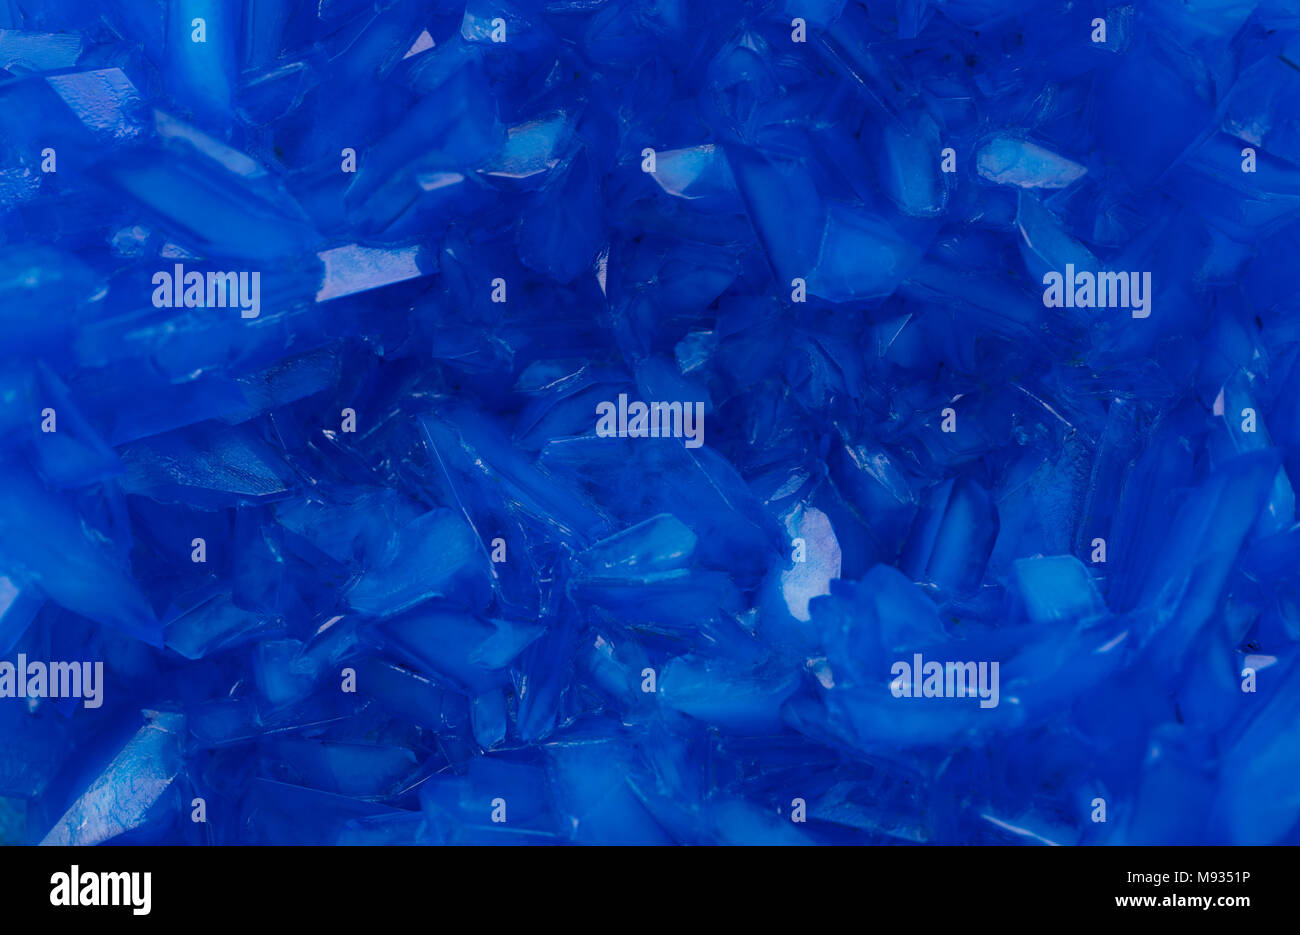 background of copper sulfate crystals Stock Photo